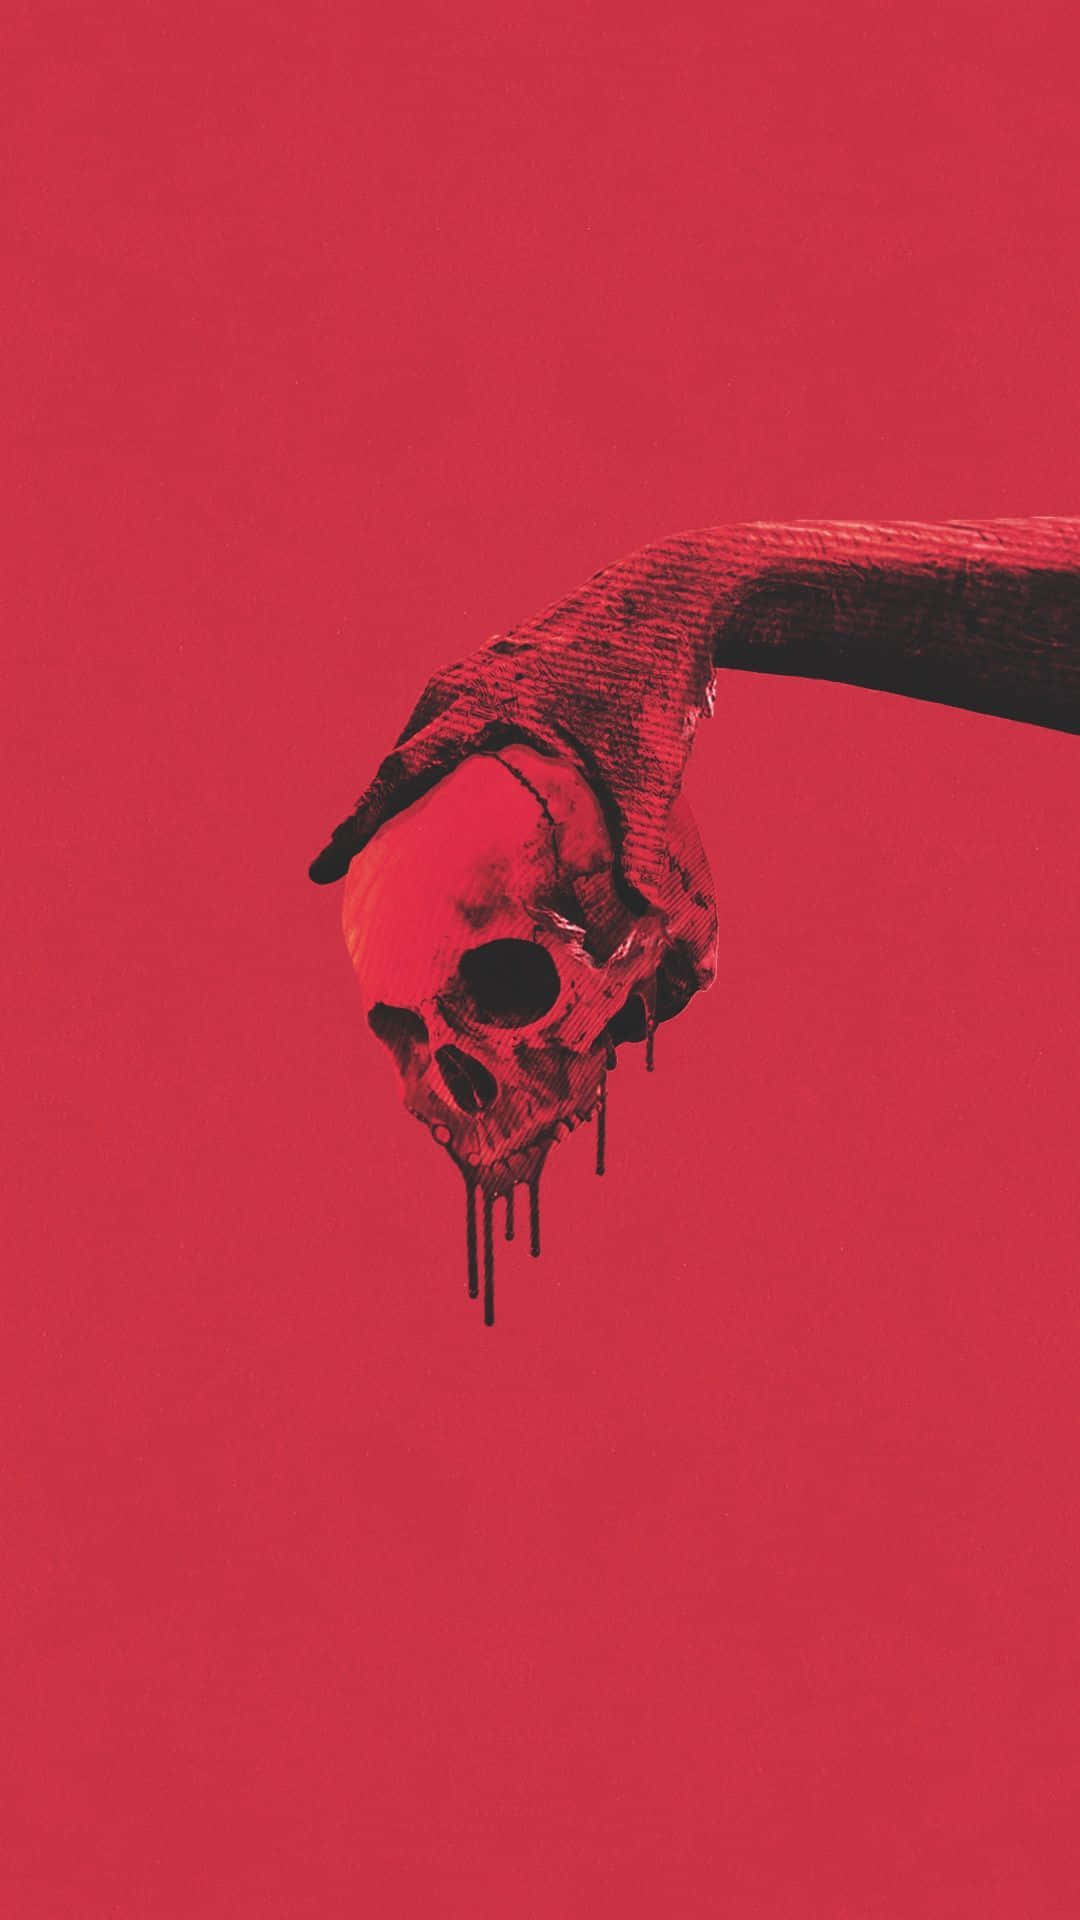 A Hand Reaching Out To A Skull On A Red Background Wallpaper